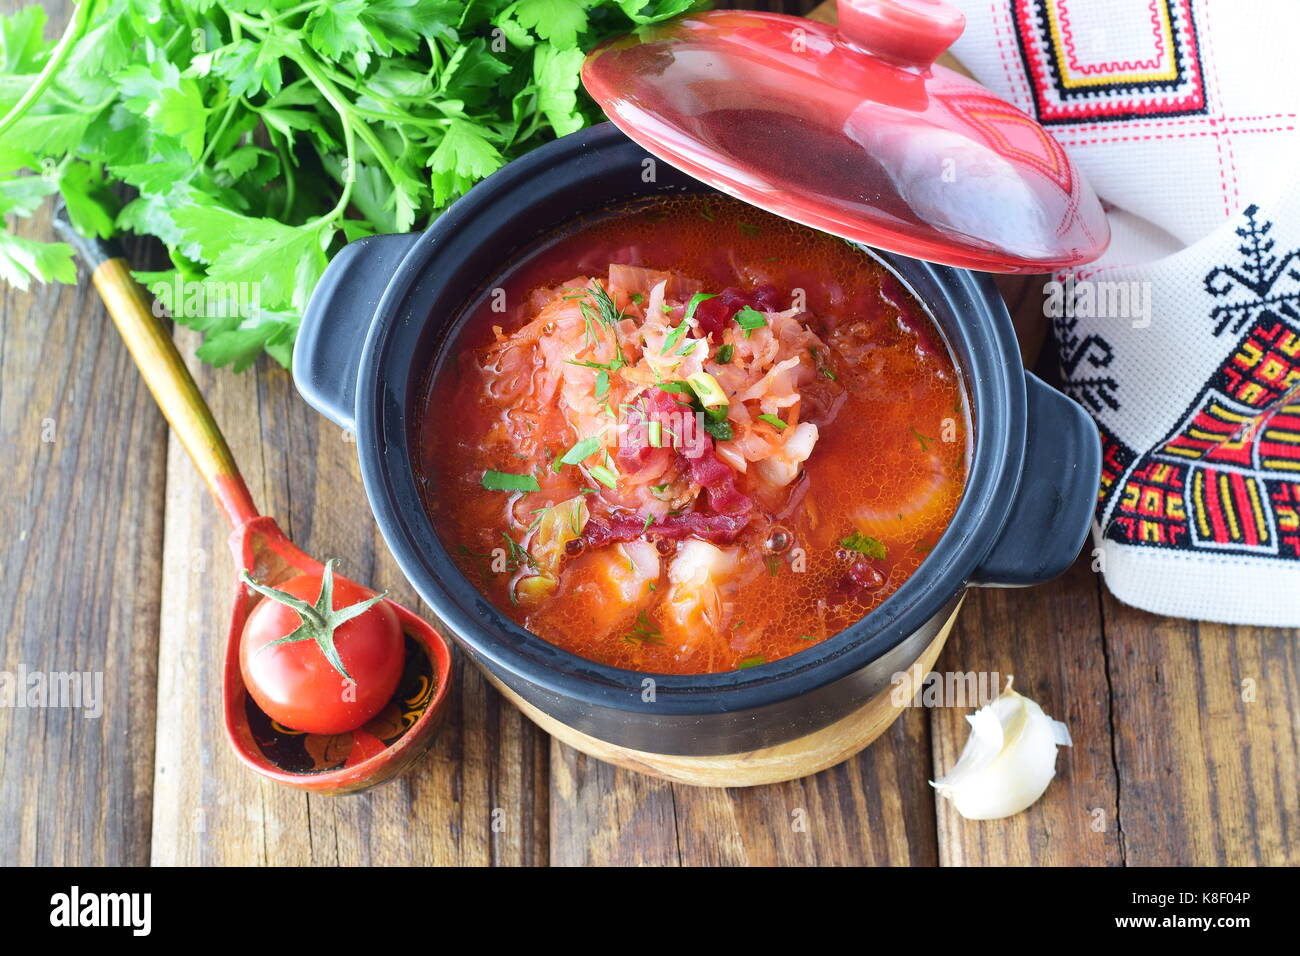 Fasting food. Vegetable soup with sauerkraut, beetroot, carrots, onions, tomato in a black pot on a wooden background. Traditional Eastern European Stock Photo